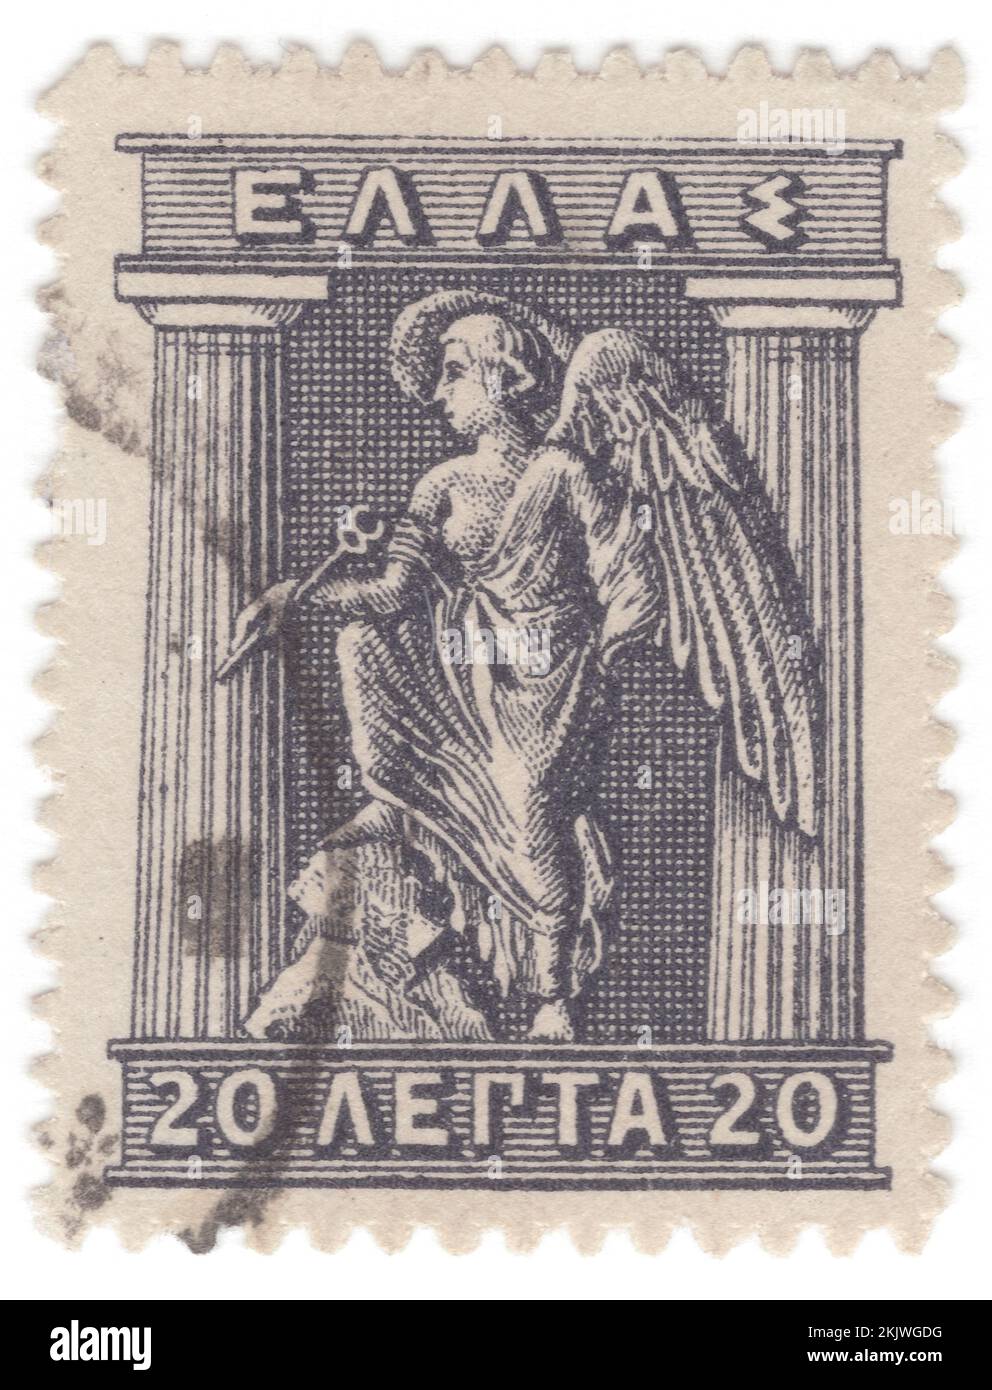 GREECE - 1911: An 20 lepta grey-lilac postage stamp depicting Iris Holding Caduceus. Designs are from Cretan and Arcadian coins of the 4th Century, B.C. In ancient Greek religion and mythology, Iris is a daughter of the gods Thaumas and Electra, the personification of the rainbow and messenger of the gods, a servant to the Olympians and especially Queen Hera. Iris appears in several stories carrying messages from and to the gods or running errands but has no unique mythology of her own Stock Photo